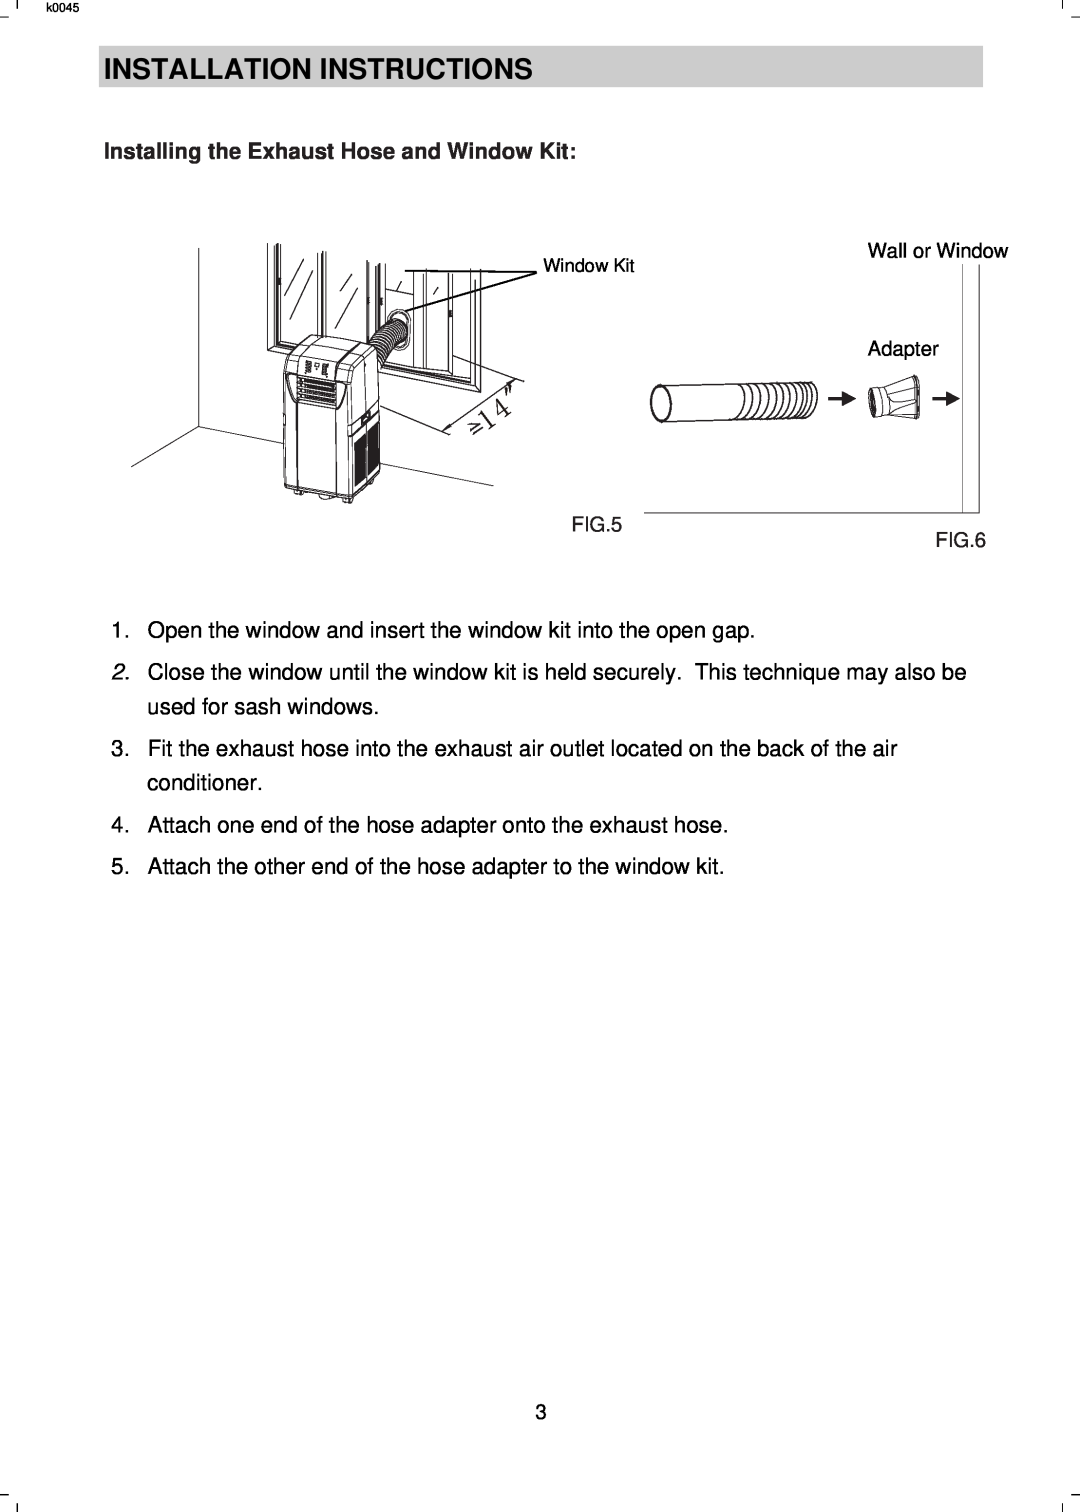 NewAir AC12000H, AC12000E manual Installation Instructions, Installing the Exhaust Hose and Window Kit 